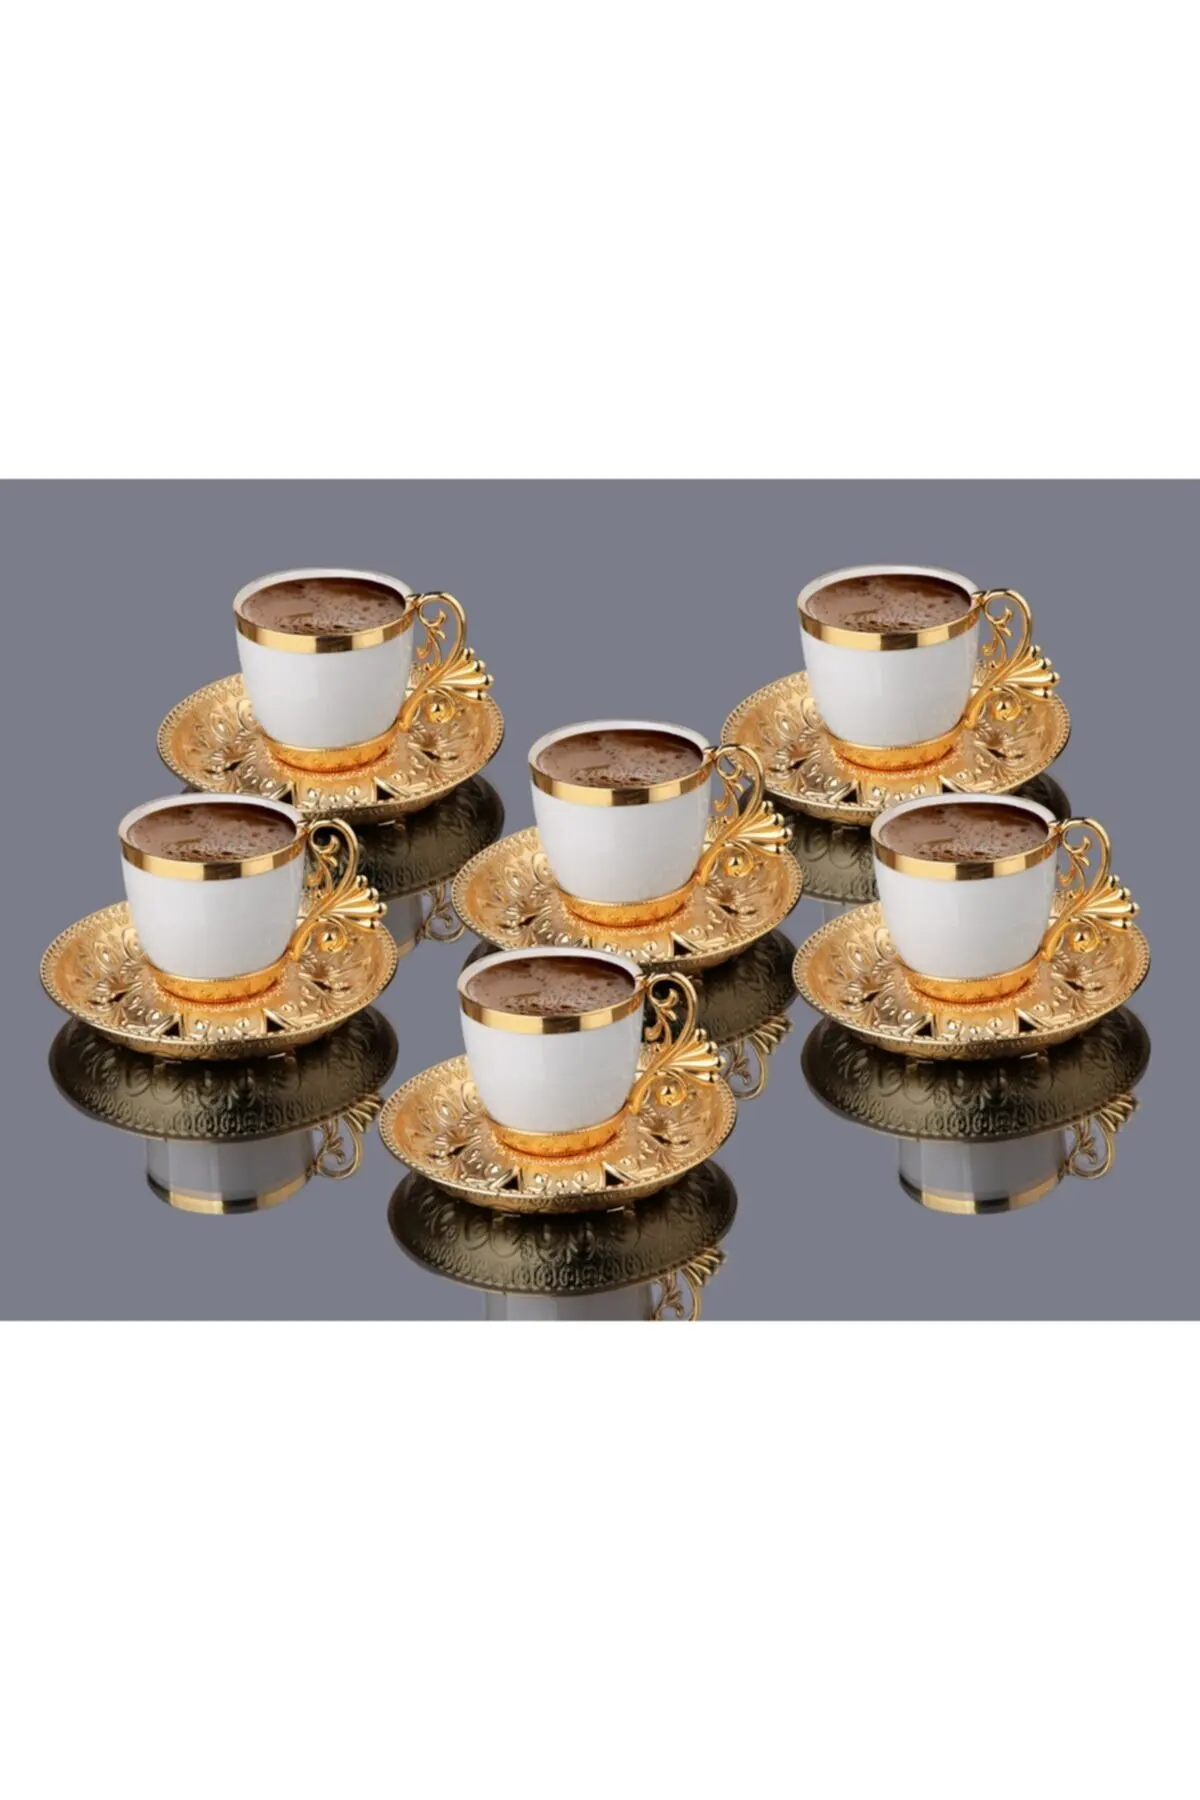 https://ae01.alicdn.com/kf/U1d69f881e22c45b094dec5812ed307d2B/Turkish-Golden-Coffee-Cups-12-Pcs-Saucers-Serving-Set-Ceramic-Coffee-Mugs-Best-For-Home-Decor.jpg